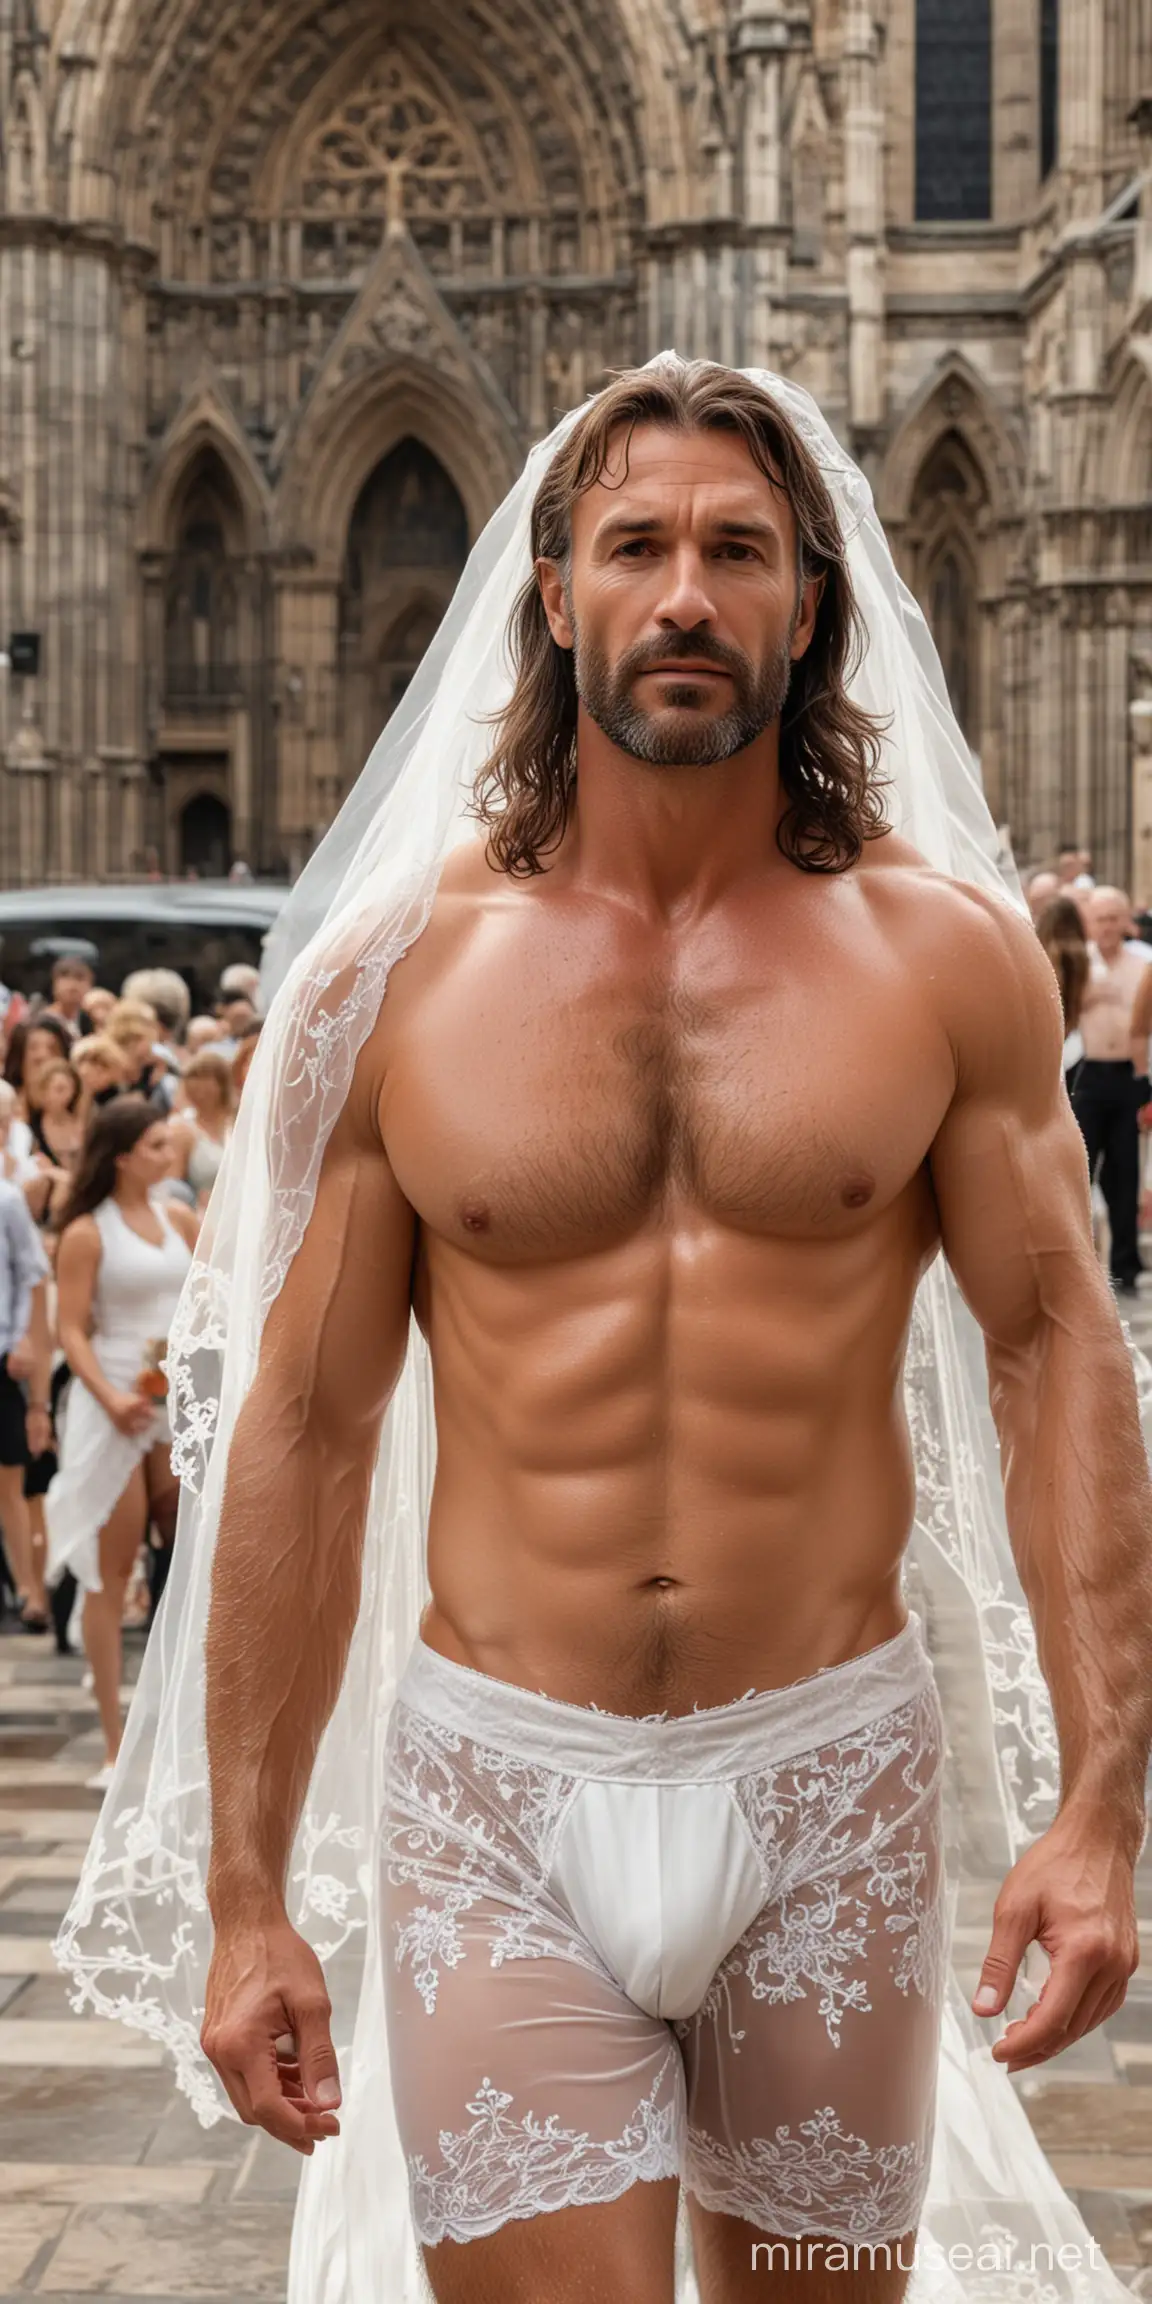 Mature muscular man, hot, handsome, sexy, beautiful, shirtless, sweaty, drenched in sweat, body glistening, hairy chest, hairy body, long hair, wearing white lace lingerie, white veil, walking down the aisle,background of cathedral 